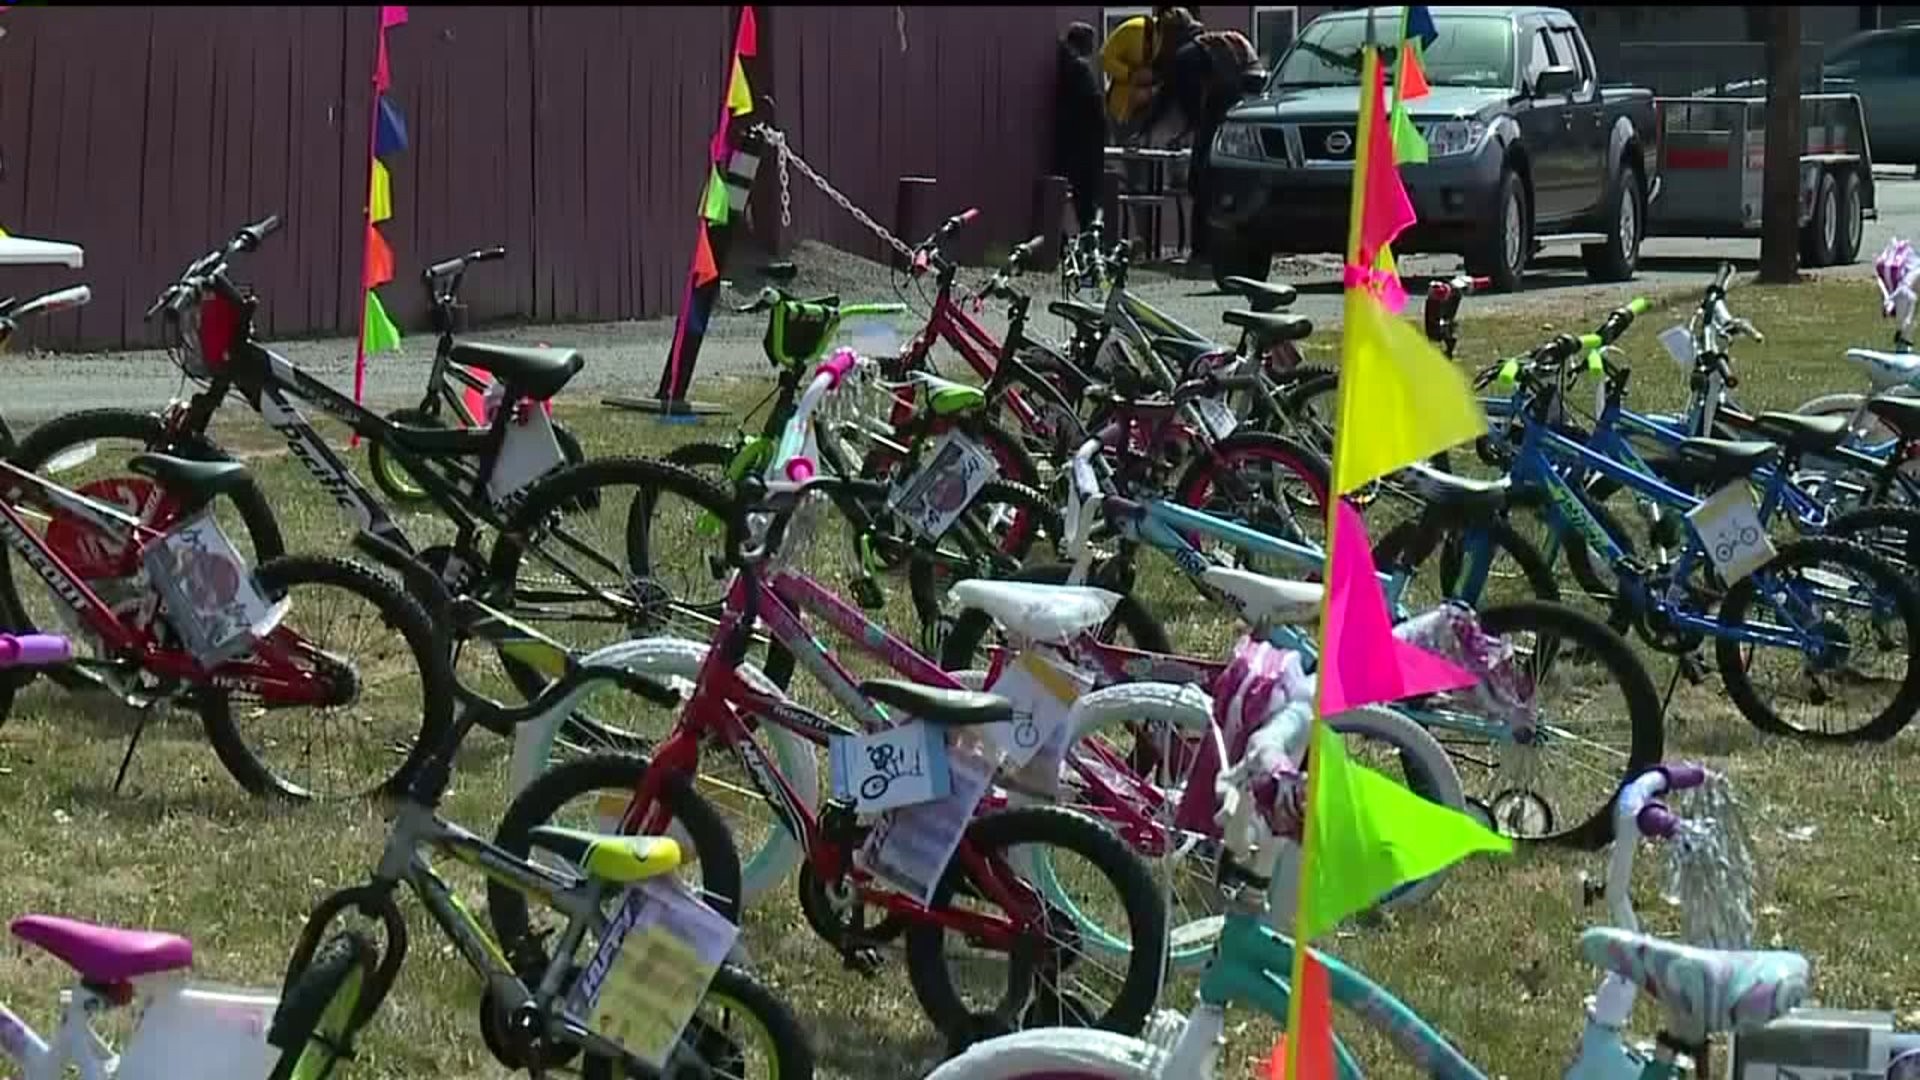 Church Giving Out Bikes at Easter Egg Hunt